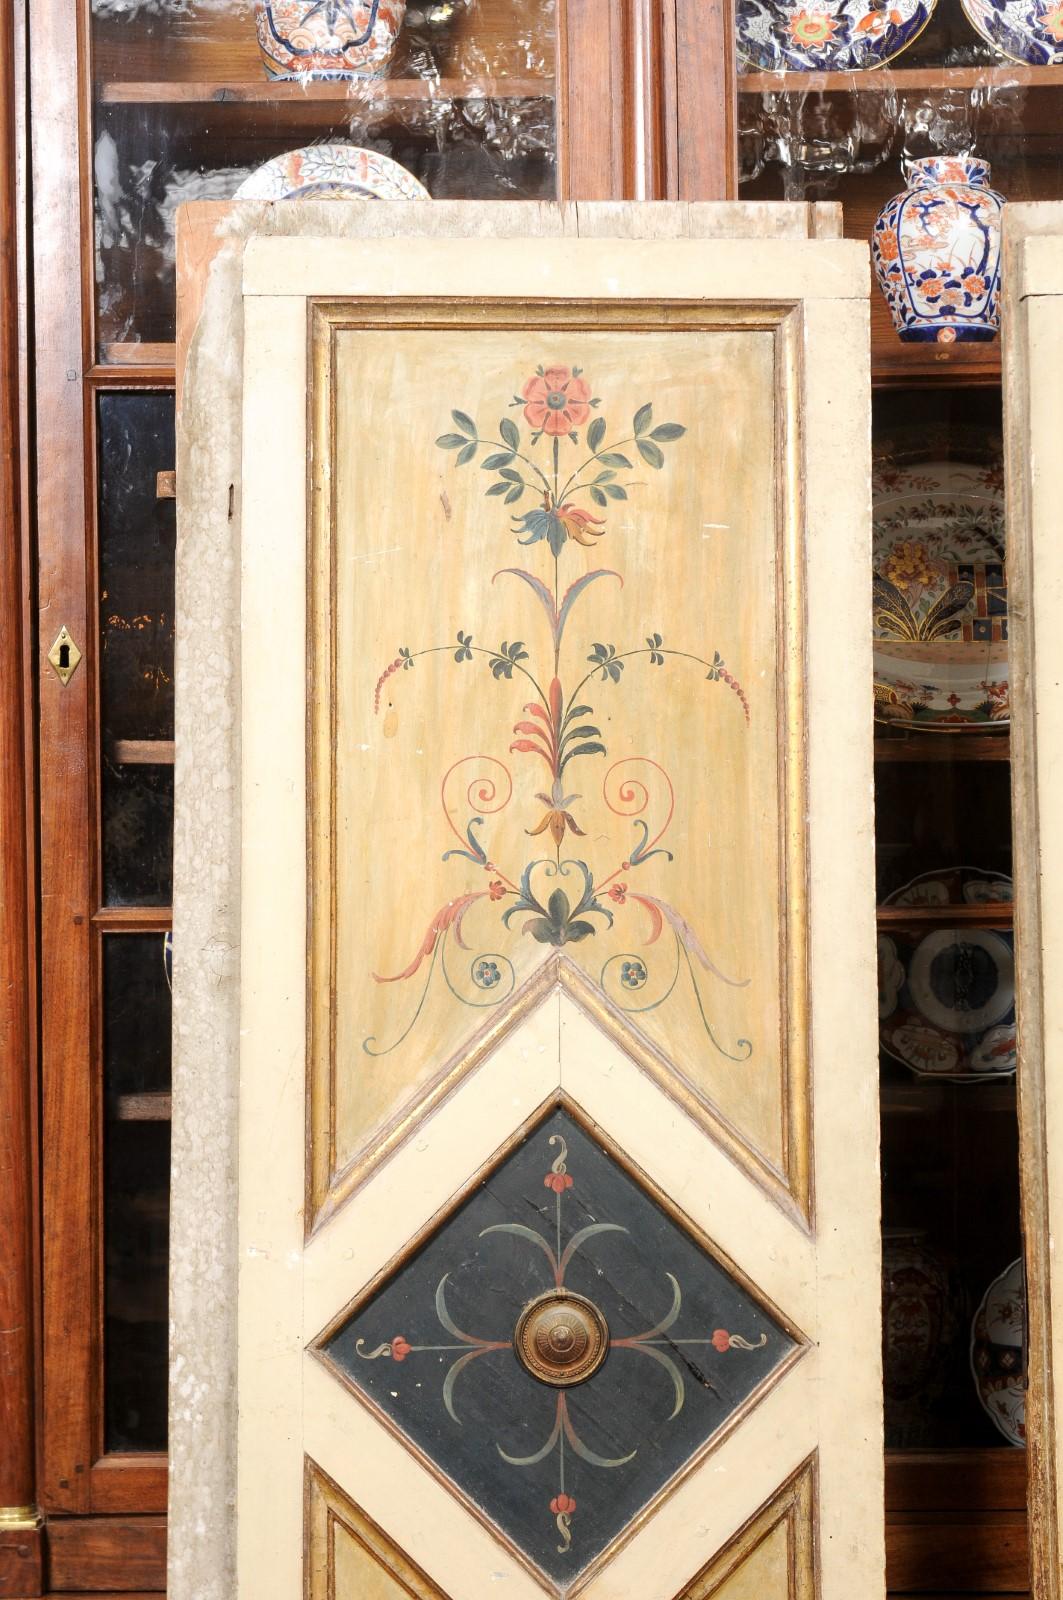 Pair of Neoclassical Painted Doors with Arabesque Designs, ca. 1800 For Sale 1